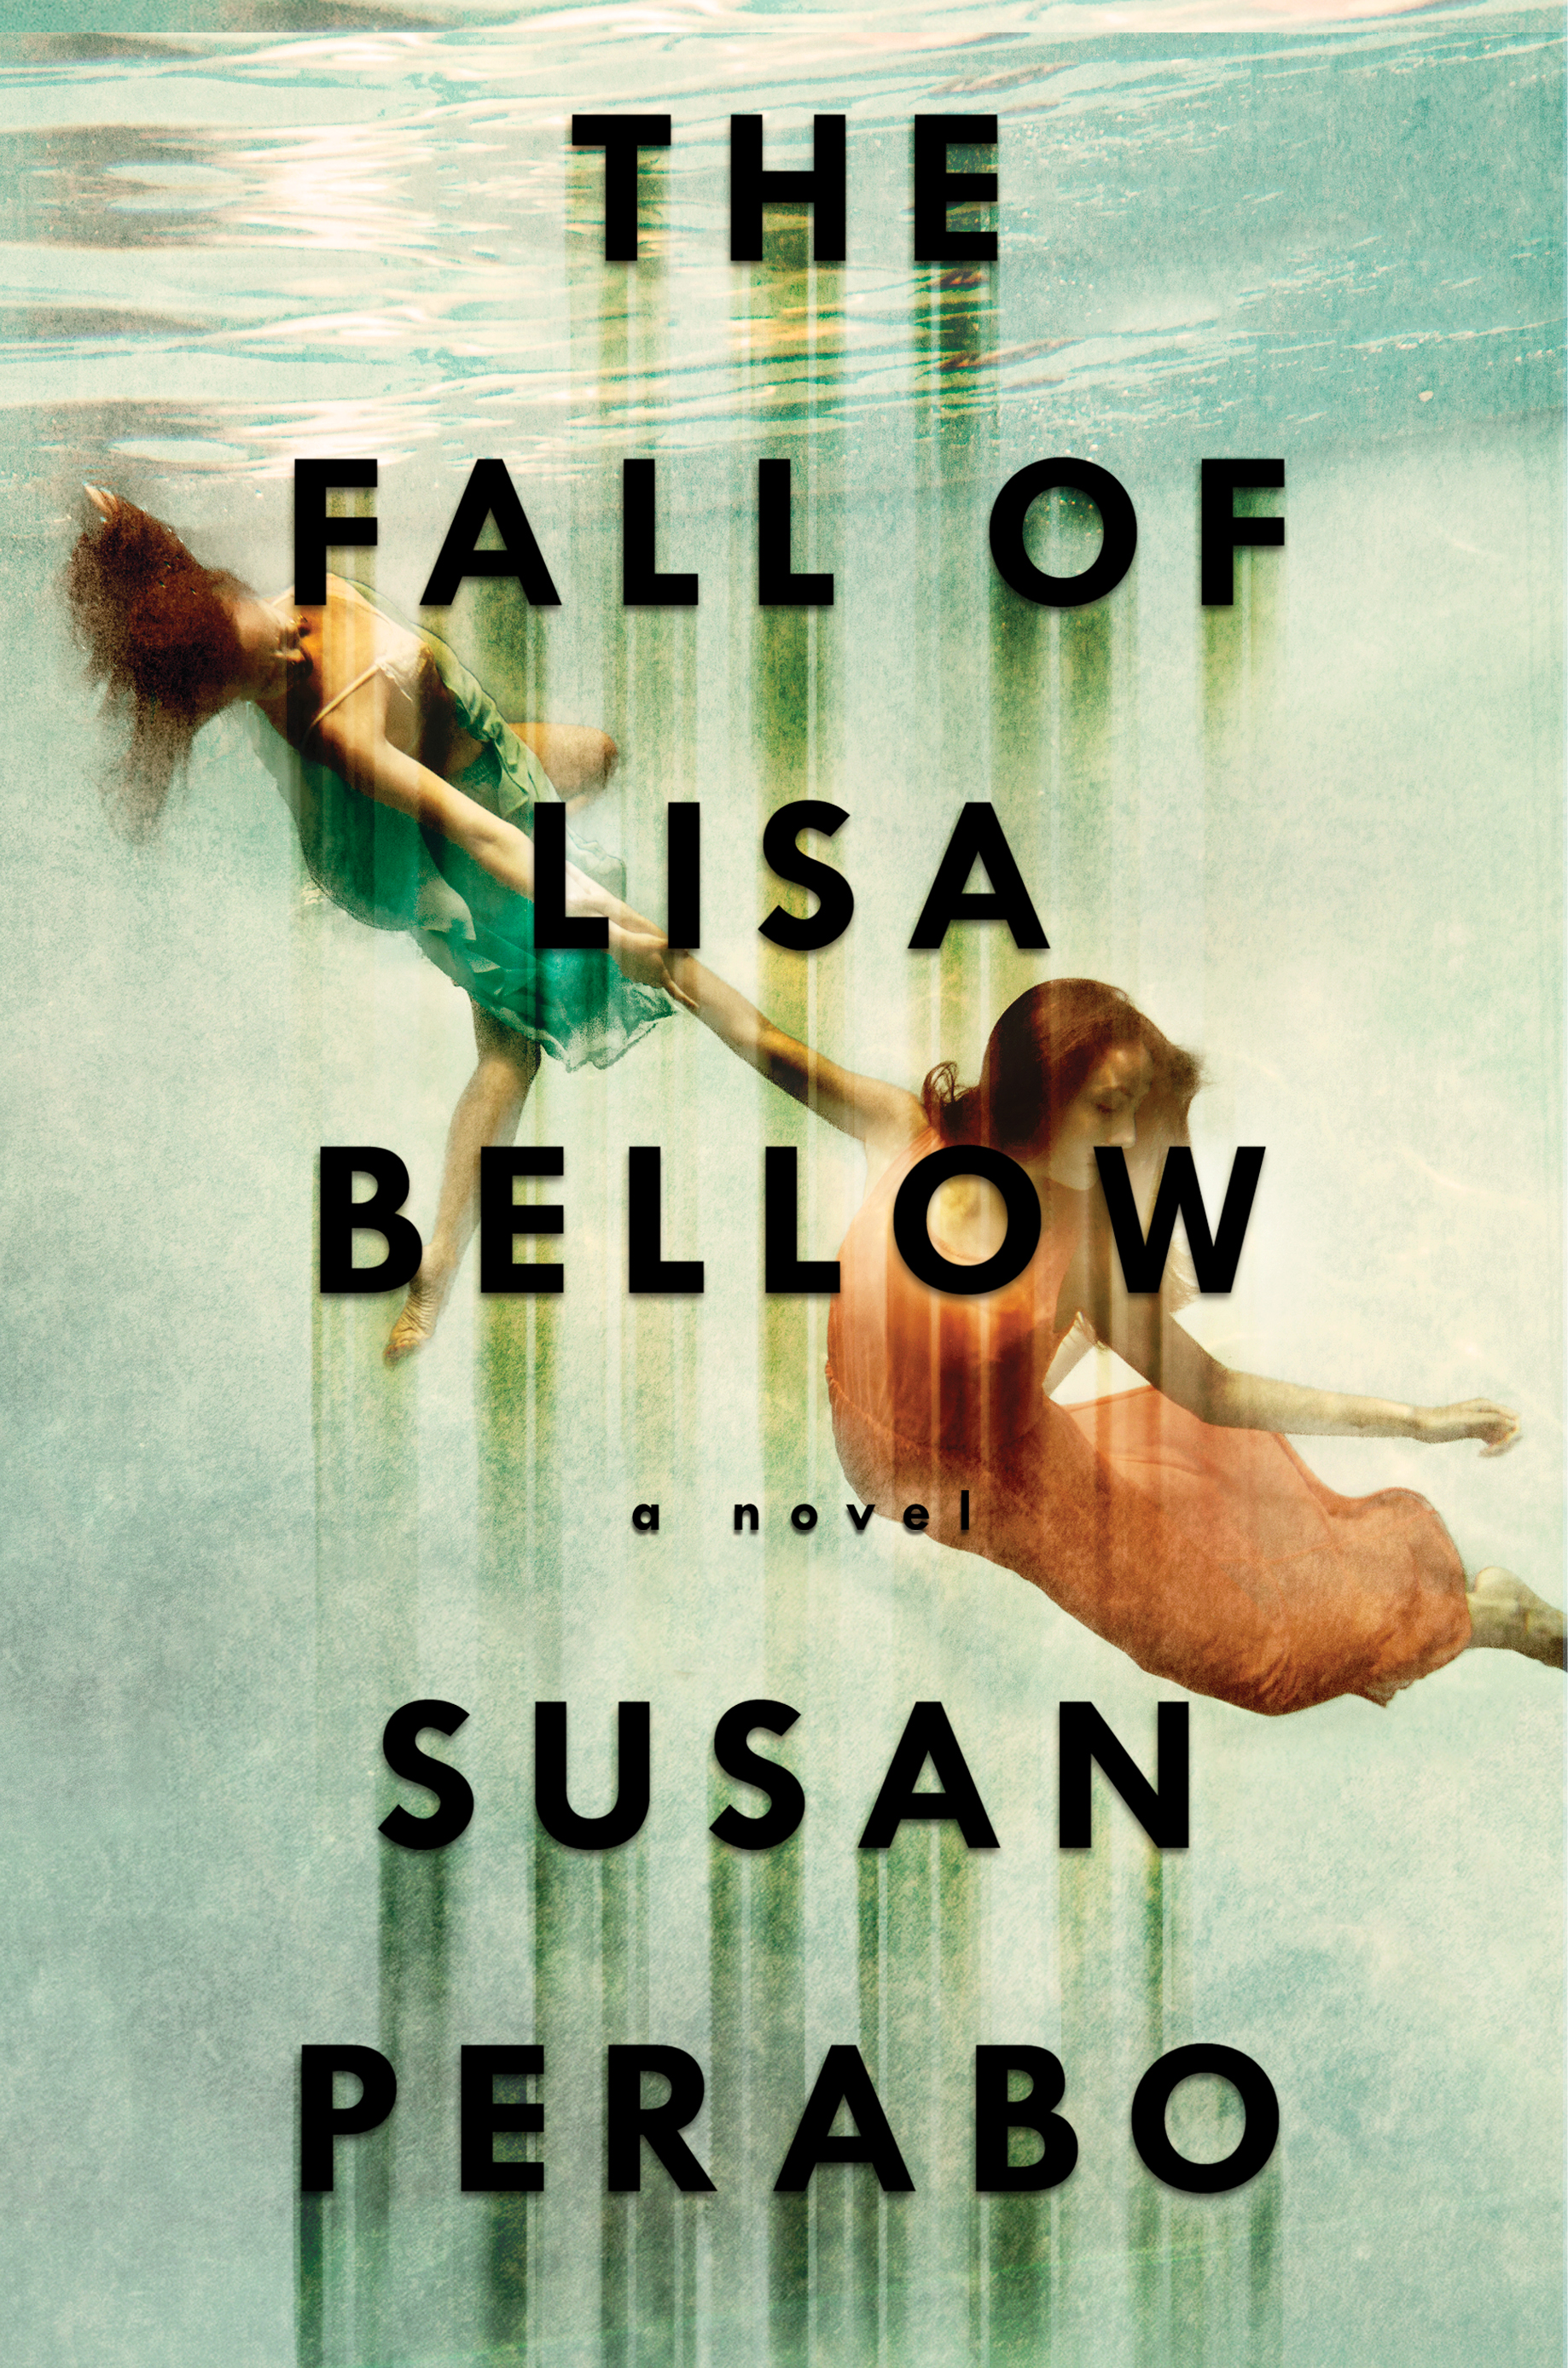 Book Launch: The Fall of Lisa Bellow by Susan Perabo